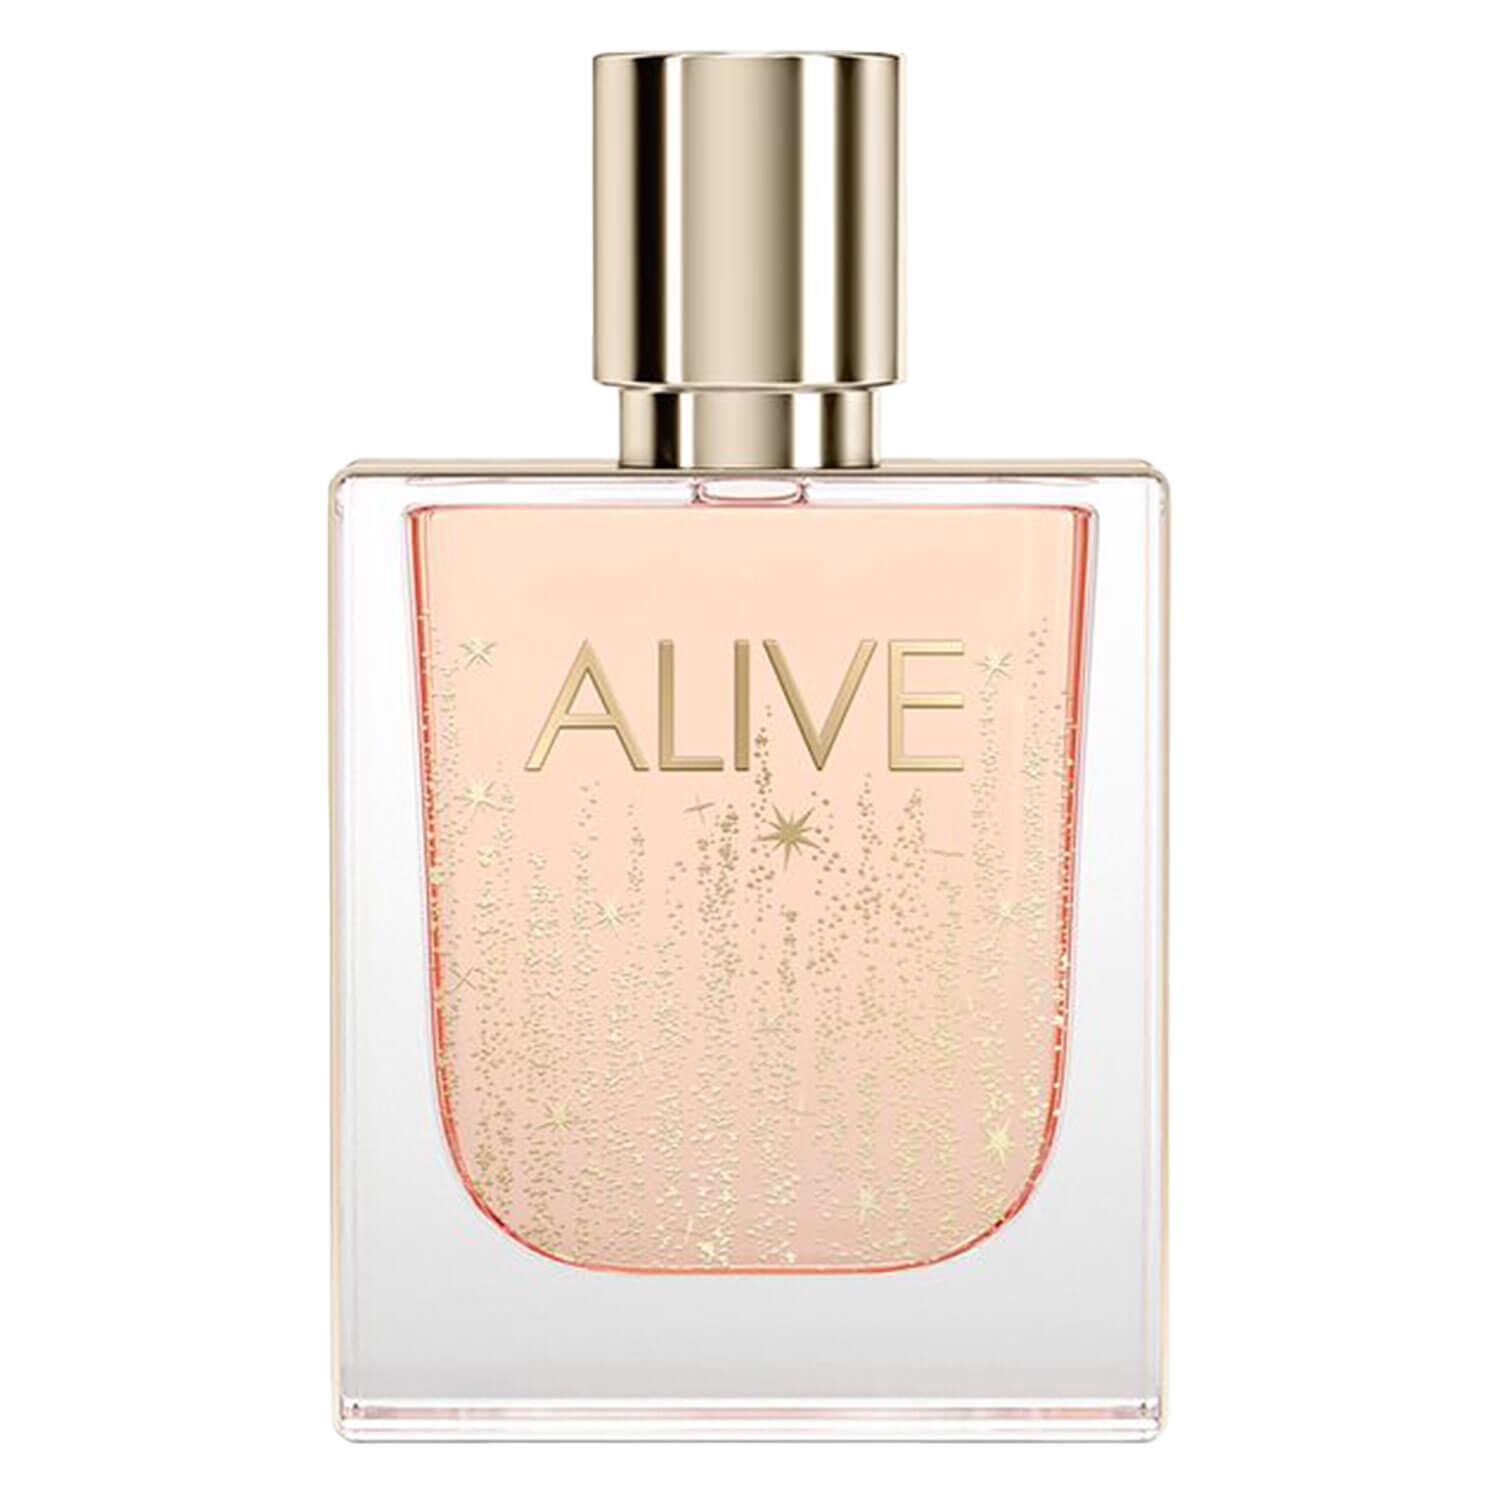 Product image from Boss Alive - Eau de Parfum Collector`s Edition